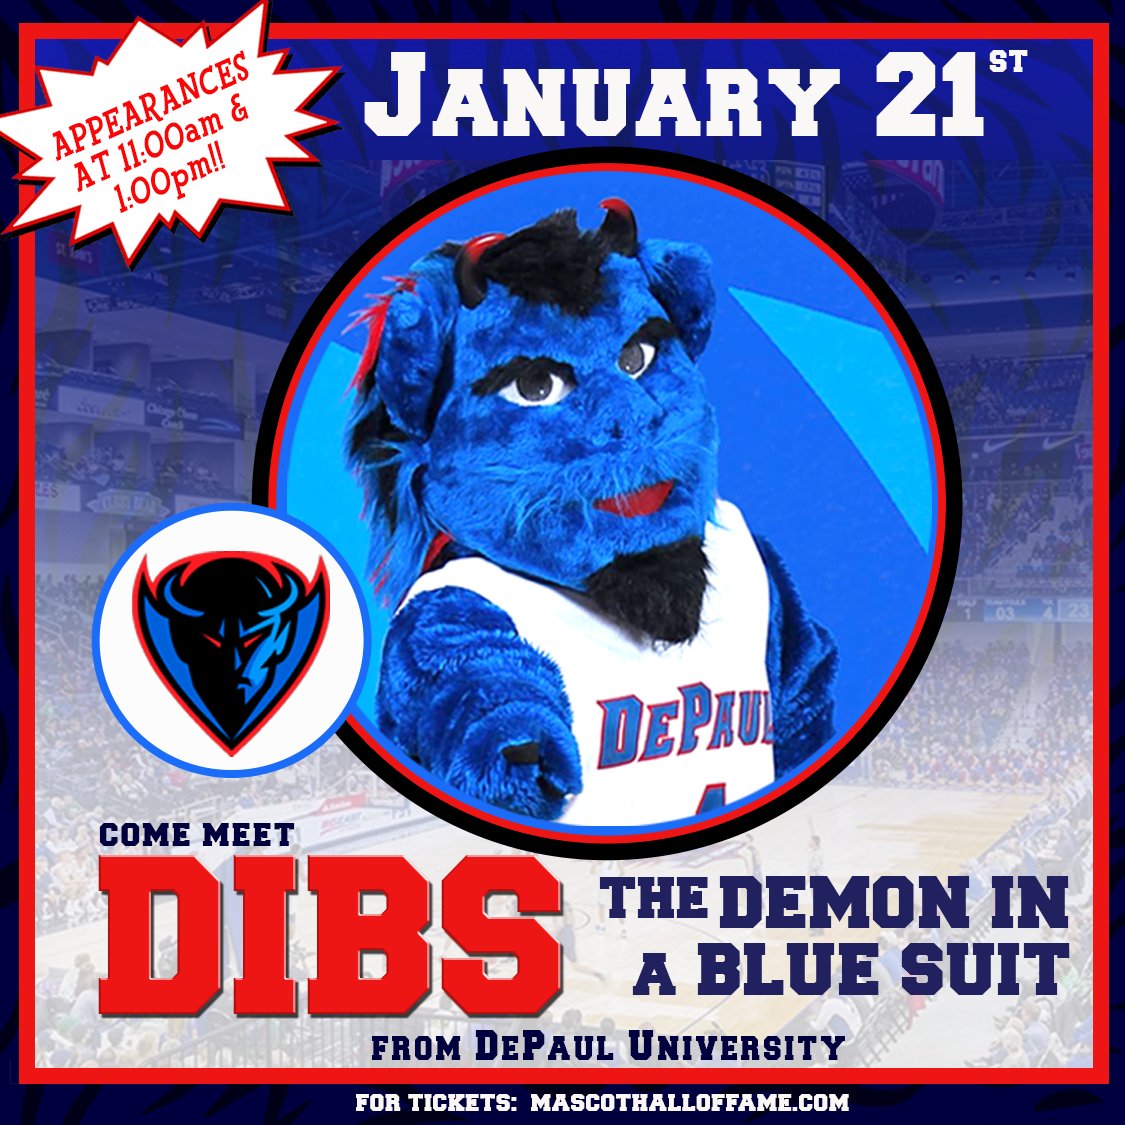 Mascot fans don't furget!

Saturday, January 21st we have our friend 
@DePaulDIBS from @DePaulAthletics coming out to visit the MHOF!
The sharped dressed demon will be bringing twice the fun with two appearances: 11:00am and 1:00pm.
mascothalloffame.com/events/

#DePaulBall #BlueGrit